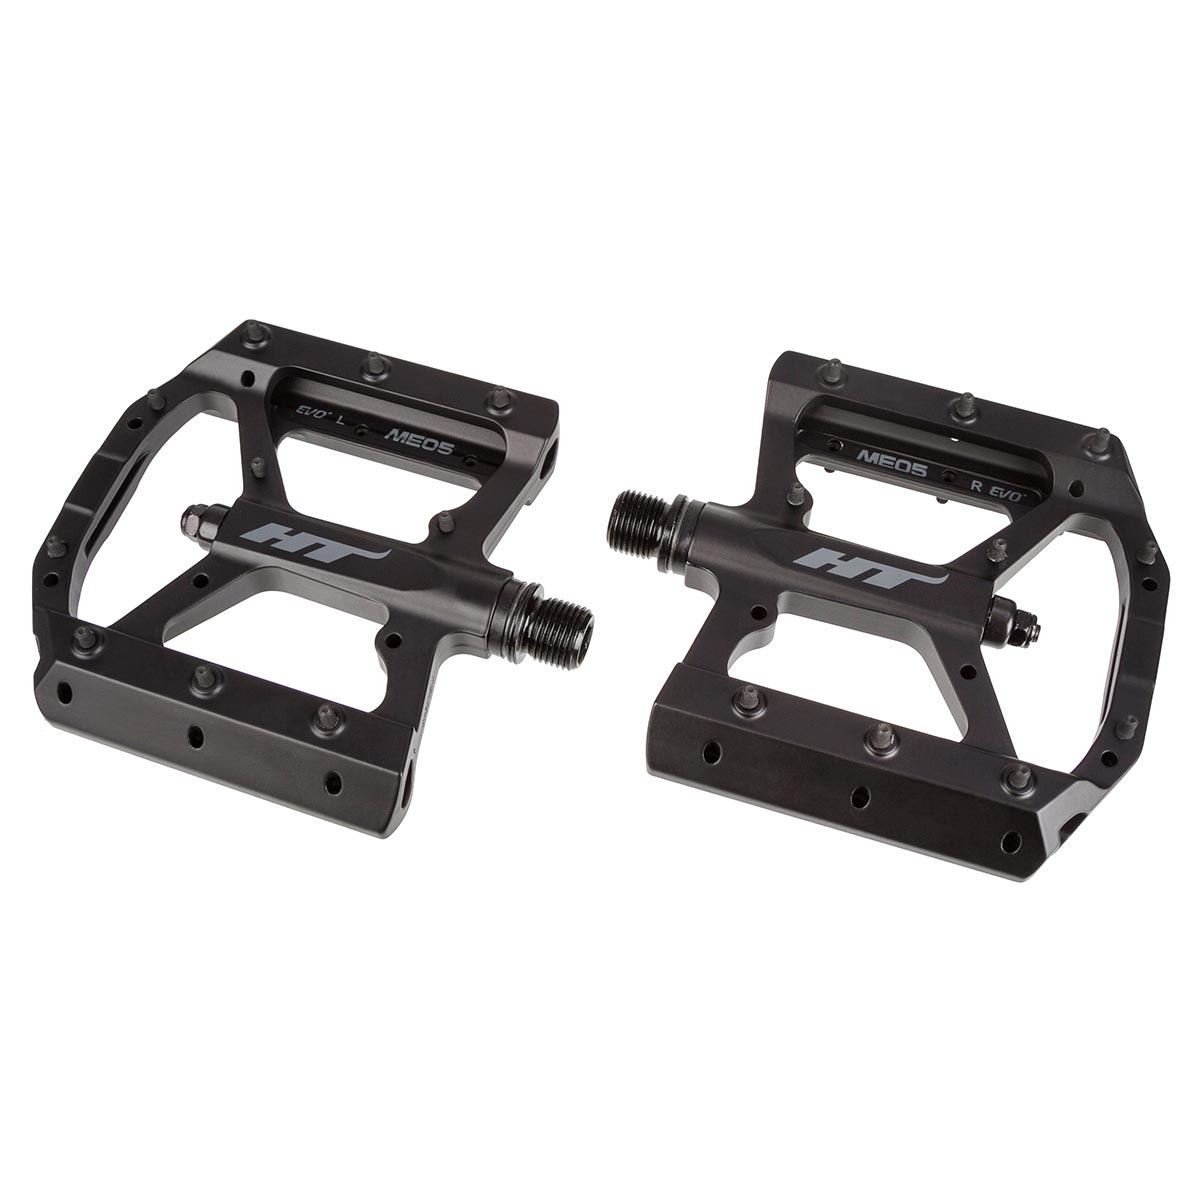 HT Components Pedals ME05 Stealth Black